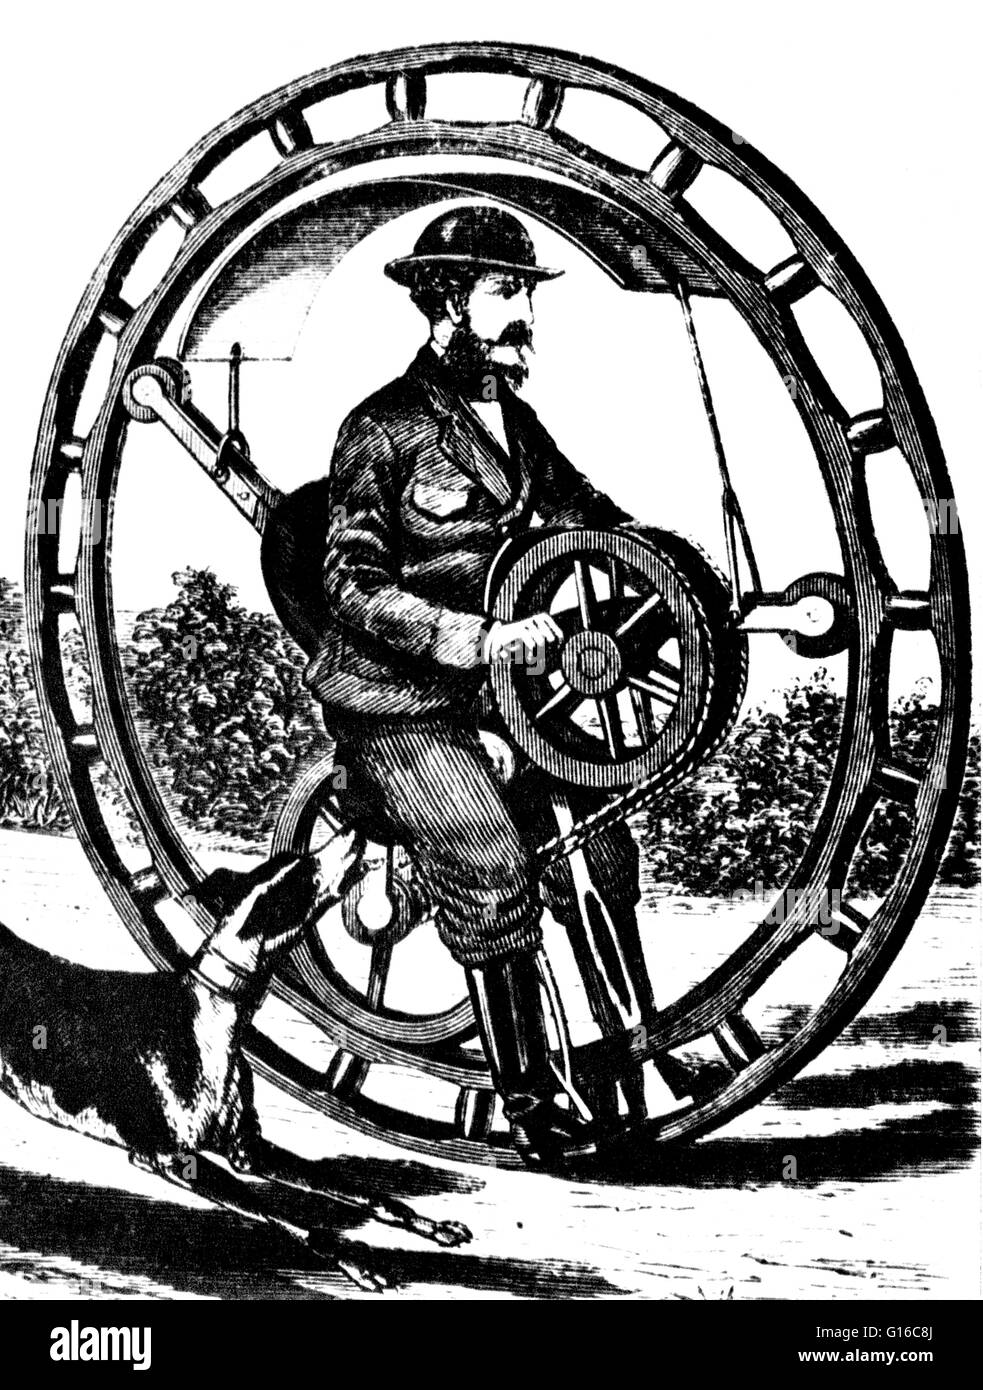 Hemming's Unicycle, or Flying Yankee Velocipede, was a hand powered monowheel patented in 1869 by Richard C. Hemming. A monowheel is a one-wheeled single-track vehicle similar to a unicycle, but instead of sitting above the wheel, the rider sits either wi Stock Photo